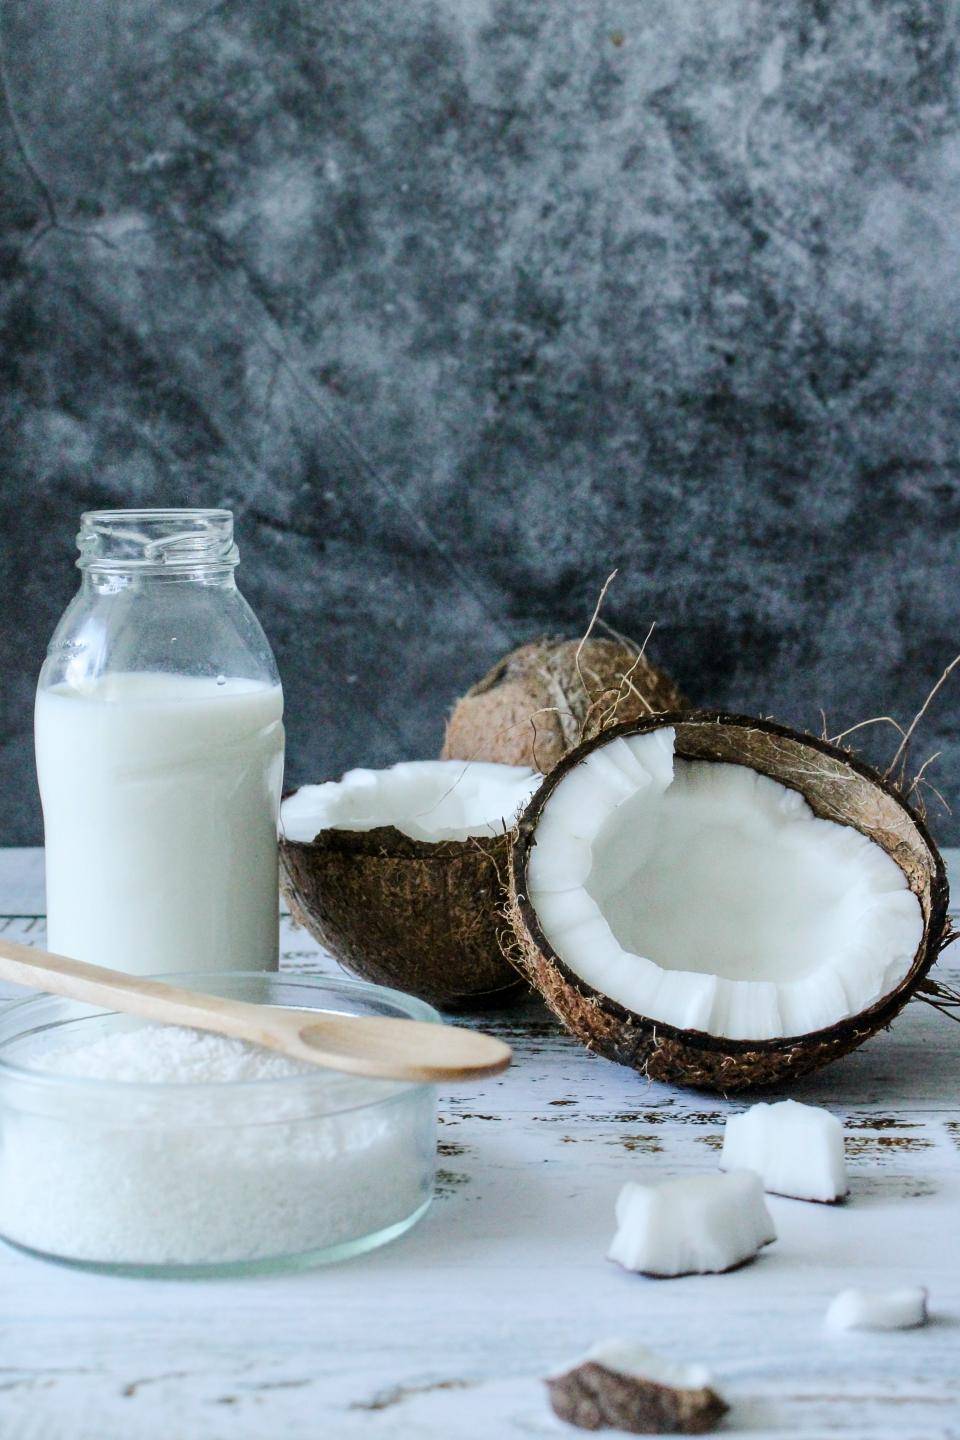 A split coconut, coconut milk in a glass bottle, and a bowl with a wooden spoon